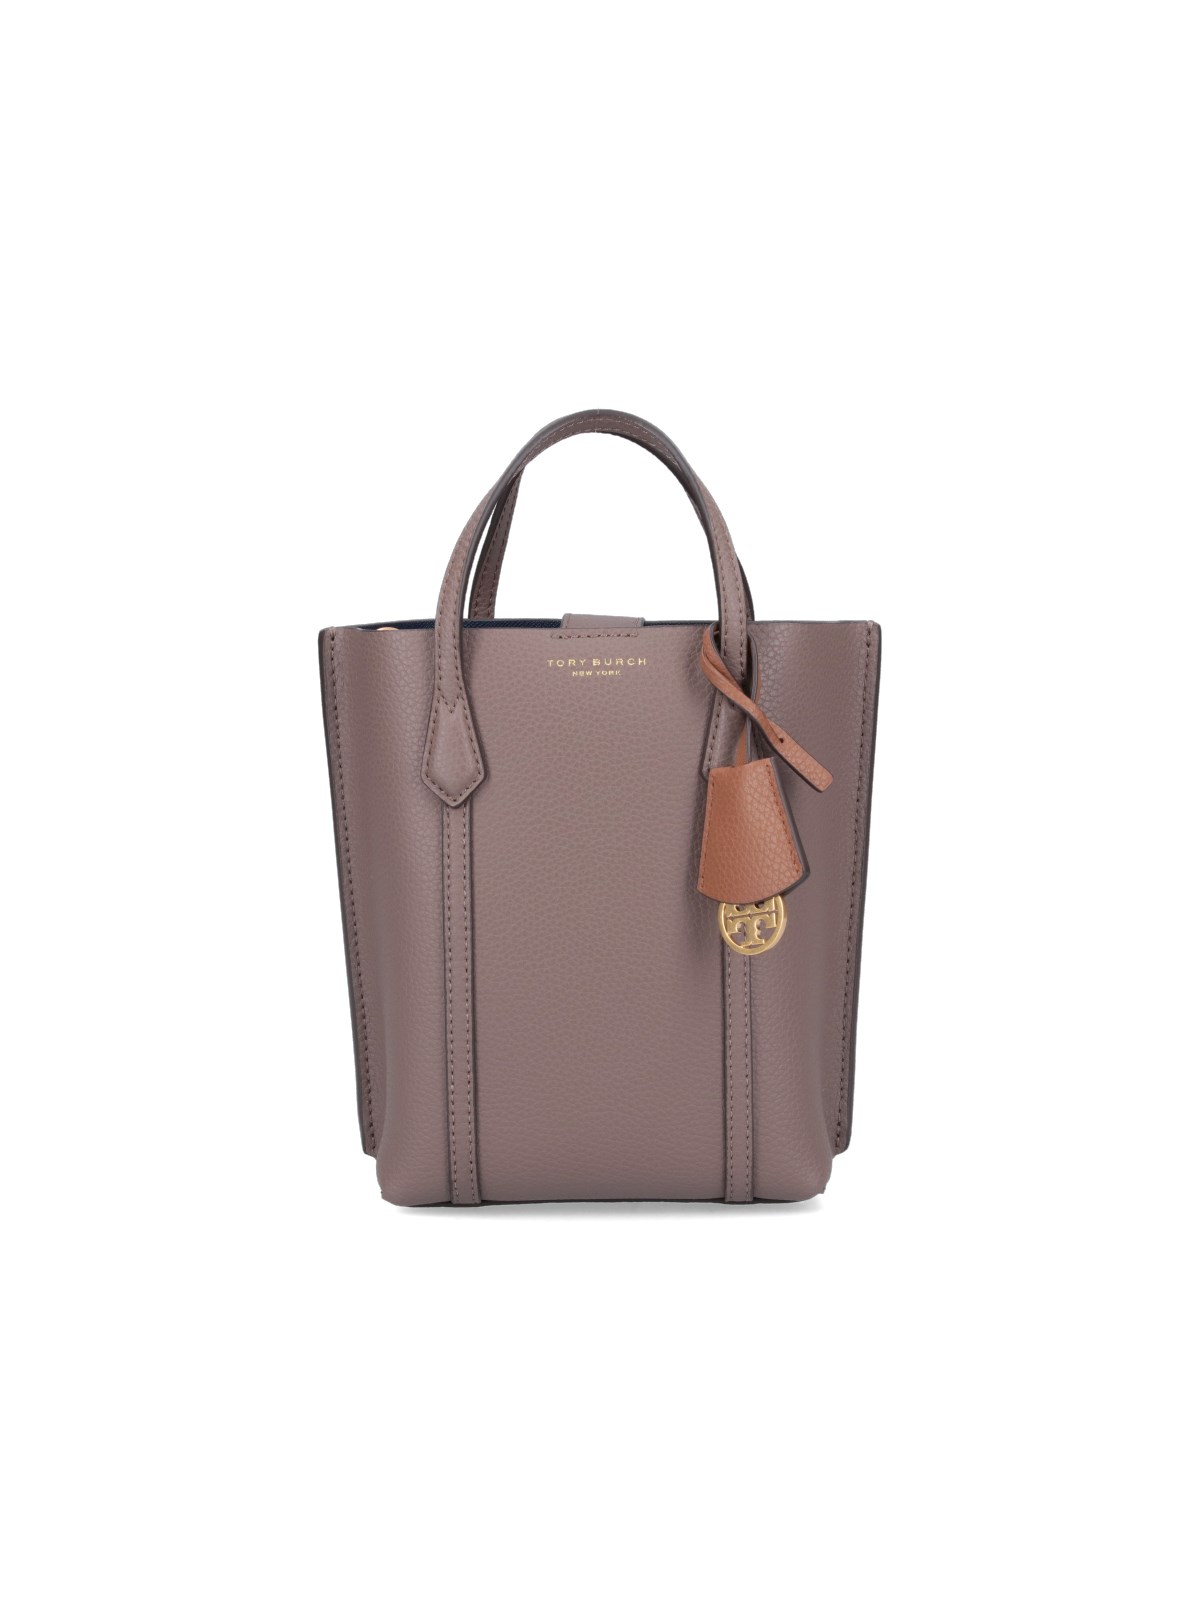 Tory Burch Mini Perry Tote Bag In Taupe